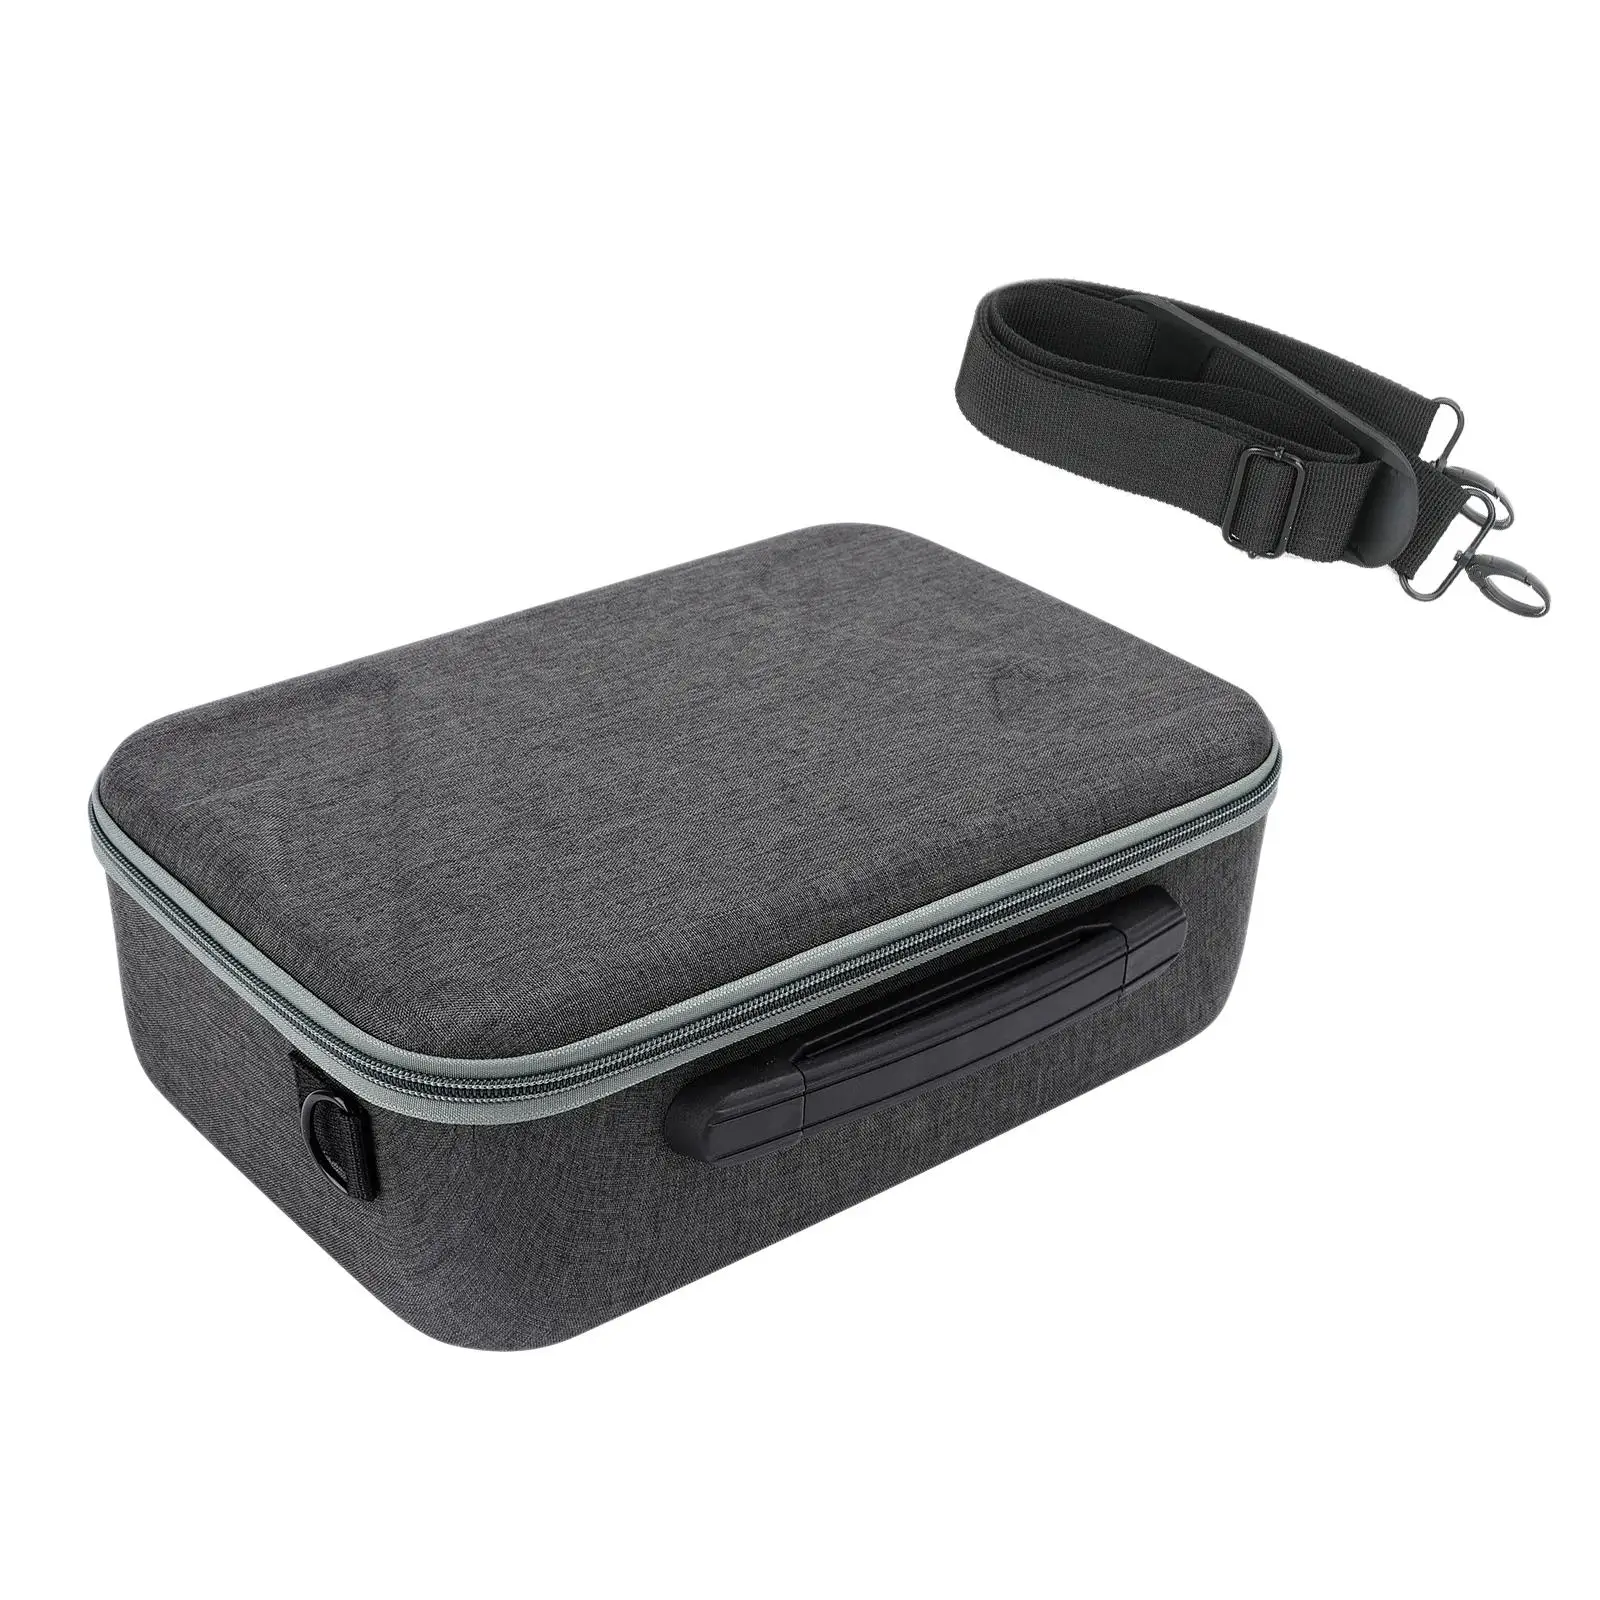 Portable Protective Suitcase for RS 3 Mini Accessories Color Black Shock Absorption and Compression Professional